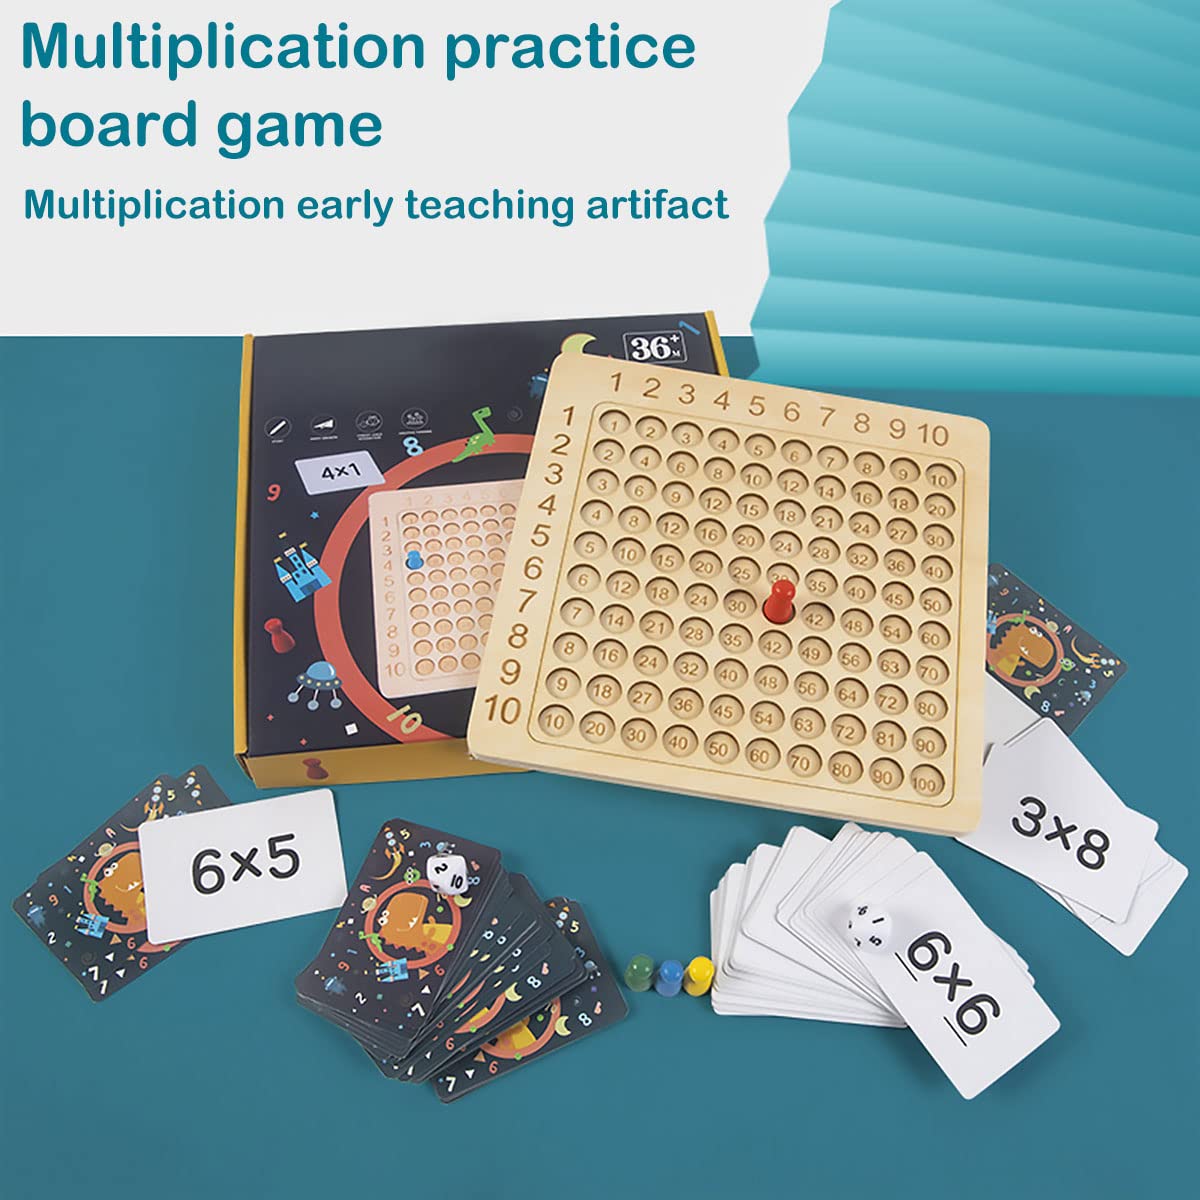 HOTBEST Wooden Math Multiplication Board Montessori Children Counting Toy Educational Multiplication Board Game Wooden Math Blocks Board for Toddlers Kids Over 3 Years Old